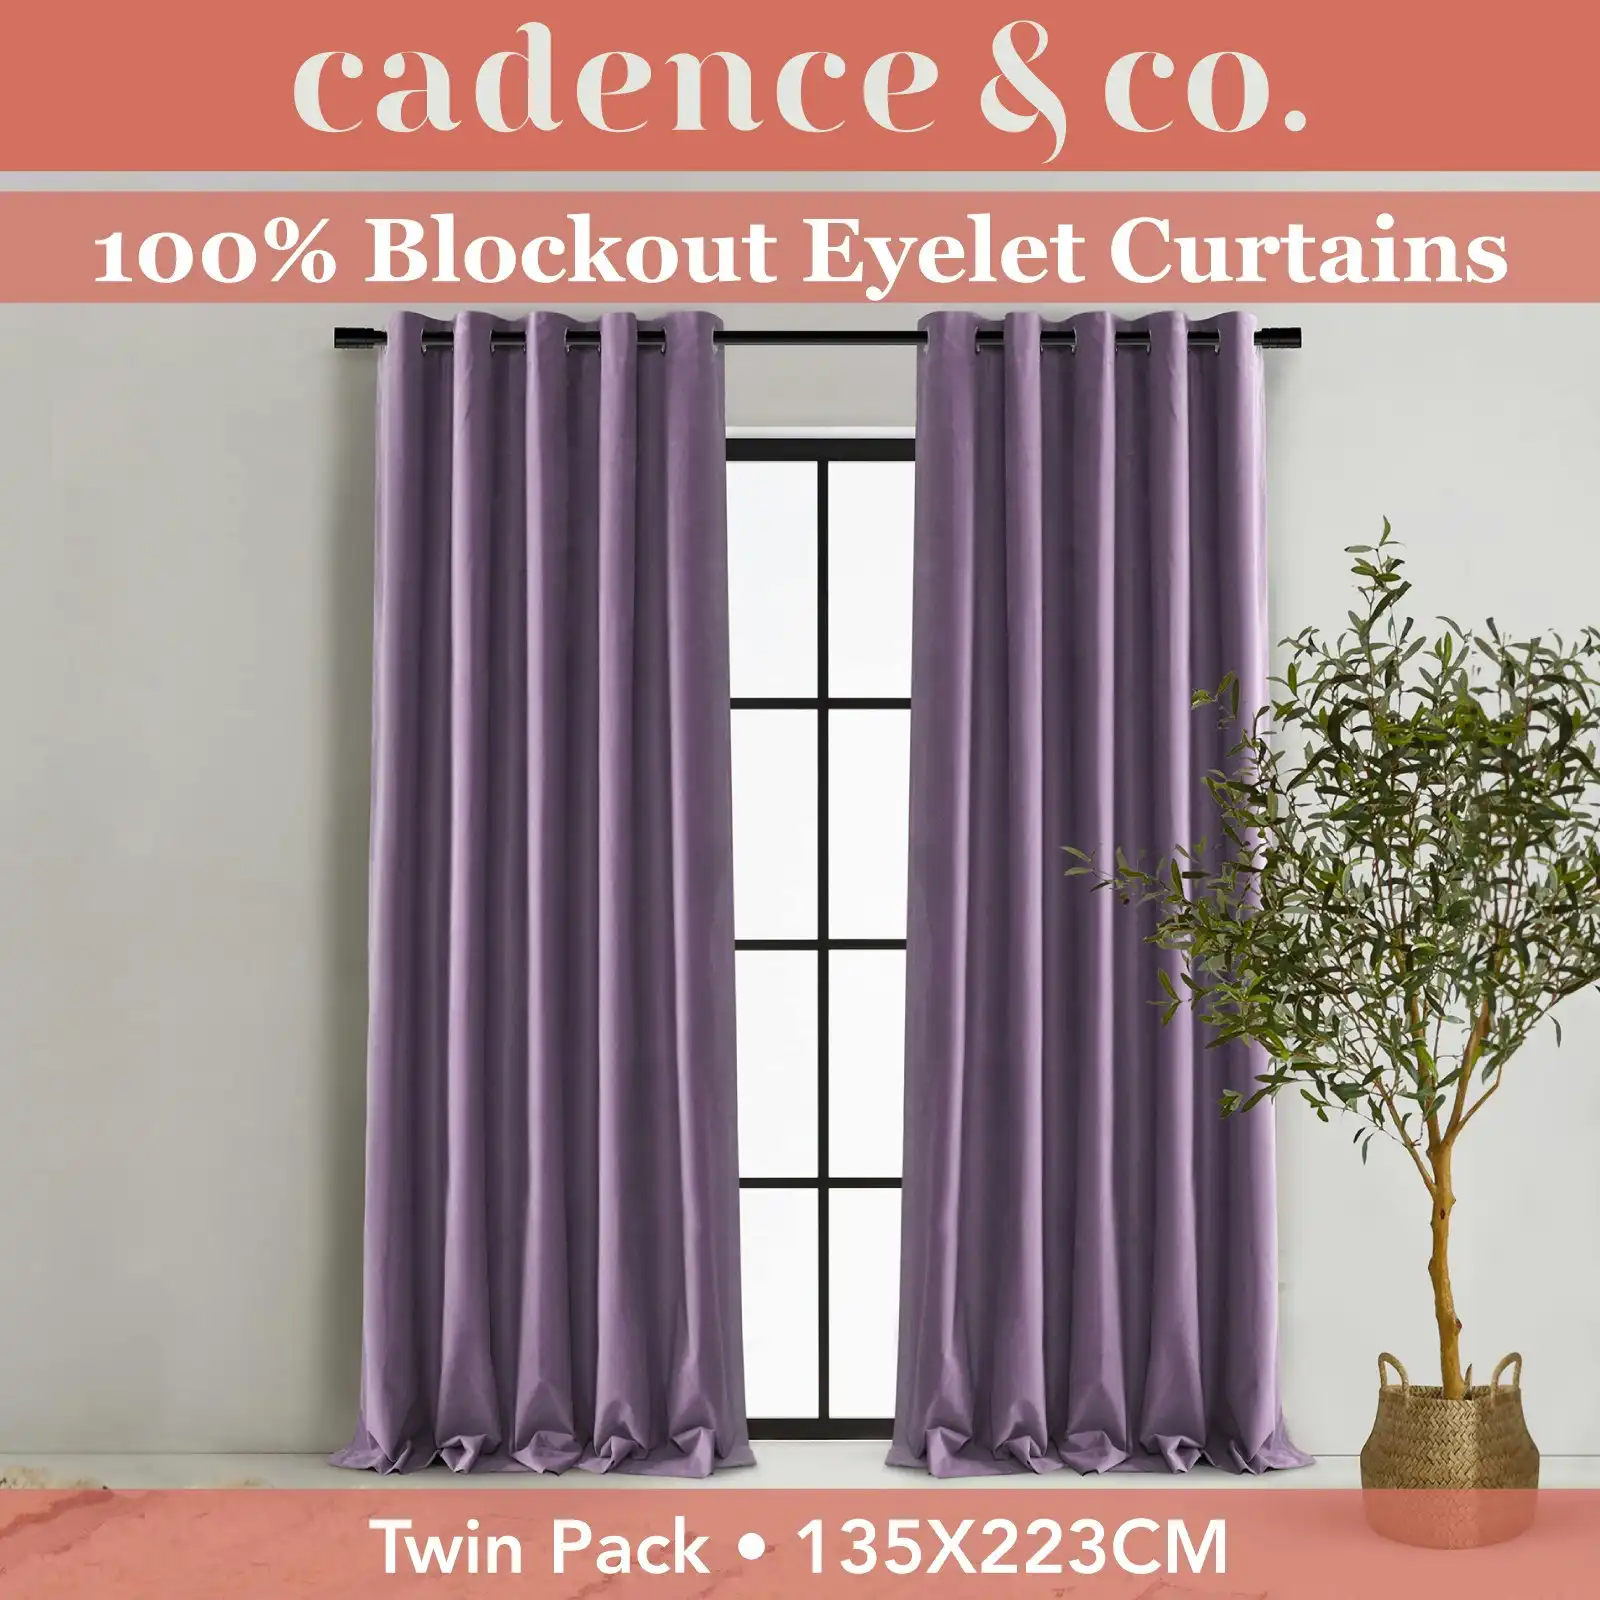 Cadence & Co. Byron Matte Velvet 100% Blockout Eyelet Curtains Twin Pack Lilac 135x223cm